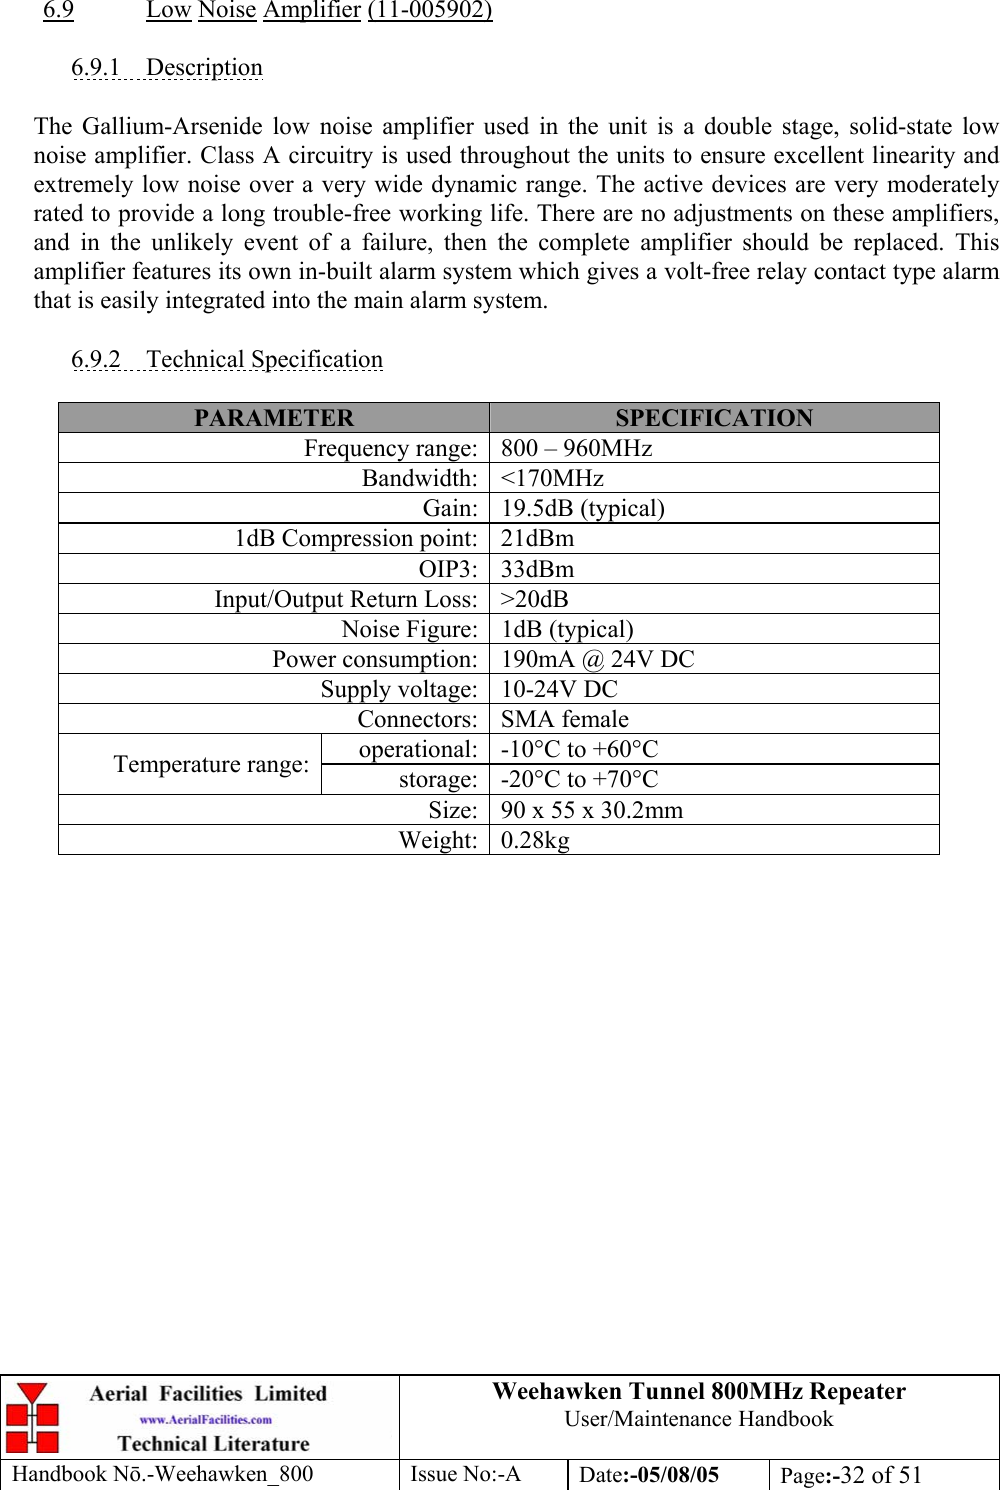 Weehawken Tunnel 800MHz Repeater User/Maintenance Handbook Handbook N.-Weehawken_800 Issue No:-A Date:-05/08/05  Page:-32 of 51   6.9 Low Noise Amplifier (11-005902)  6.9.1 Description  The Gallium-Arsenide low noise amplifier used in the unit is a double stage, solid-state low noise amplifier. Class A circuitry is used throughout the units to ensure excellent linearity and extremely low noise over a very wide dynamic range. The active devices are very moderately rated to provide a long trouble-free working life. There are no adjustments on these amplifiers, and in the unlikely event of a failure, then the complete amplifier should be replaced. This amplifier features its own in-built alarm system which gives a volt-free relay contact type alarm that is easily integrated into the main alarm system.  6.9.2 Technical Specification  PARAMETER  SPECIFICATION Frequency range: 800 – 960MHz Bandwidth: &lt;170MHz Gain: 19.5dB (typical) 1dB Compression point: 21dBm OIP3: 33dBm Input/Output Return Loss: &gt;20dB Noise Figure: 1dB (typical) Power consumption: 190mA @ 24V DC Supply voltage: 10-24V DC Connectors: SMA female operational: -10°C to +60°C Temperature range:  storage: -20°C to +70°C Size: 90 x 55 x 30.2mm Weight: 0.28kg 